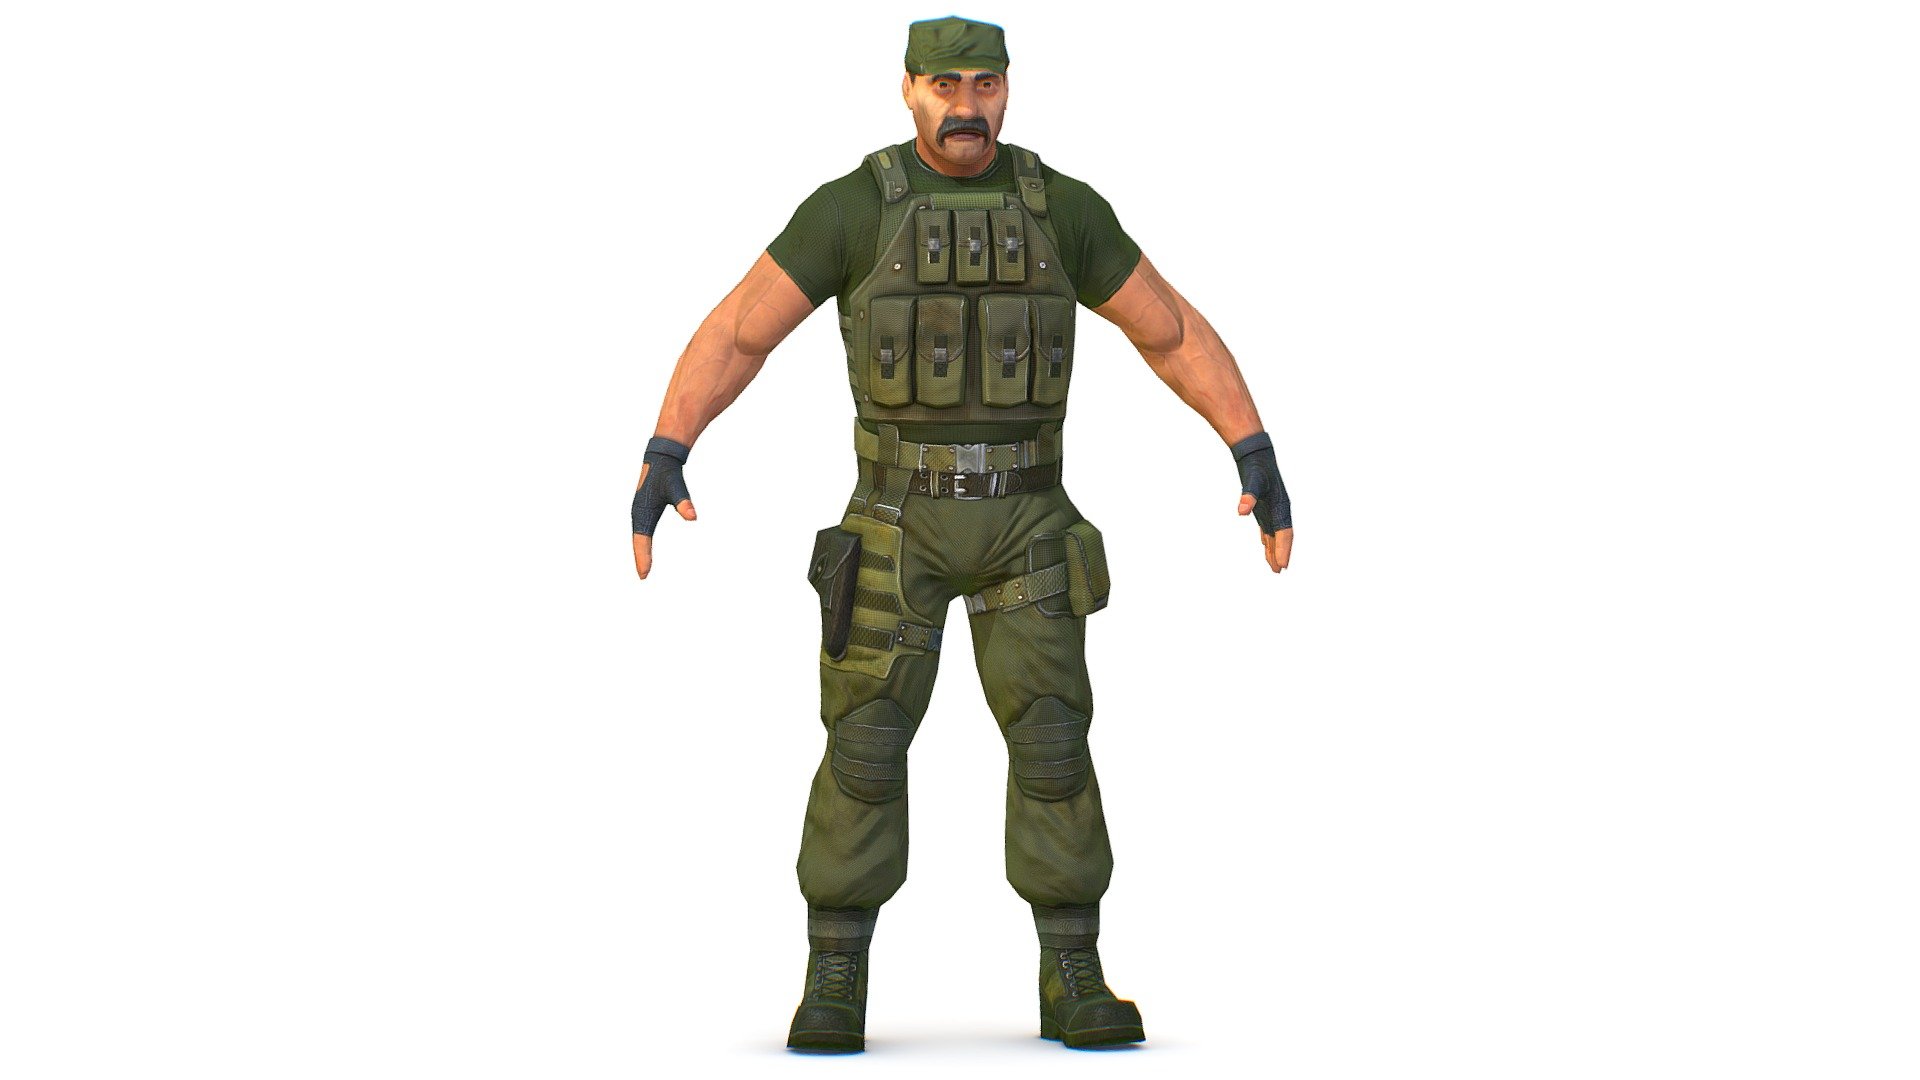 High quality LOW POLY 3d model for your game,render image or video.
textures size: 2x1024x1024 color,normal,specular (body,head)
3dsMax and Maya file included
 - LowPoly Man Boss Slave Driver Chief Soldier - Buy Royalty Free 3D model by Oleg Shuldiakov (@olegshuldiakov) 3d model